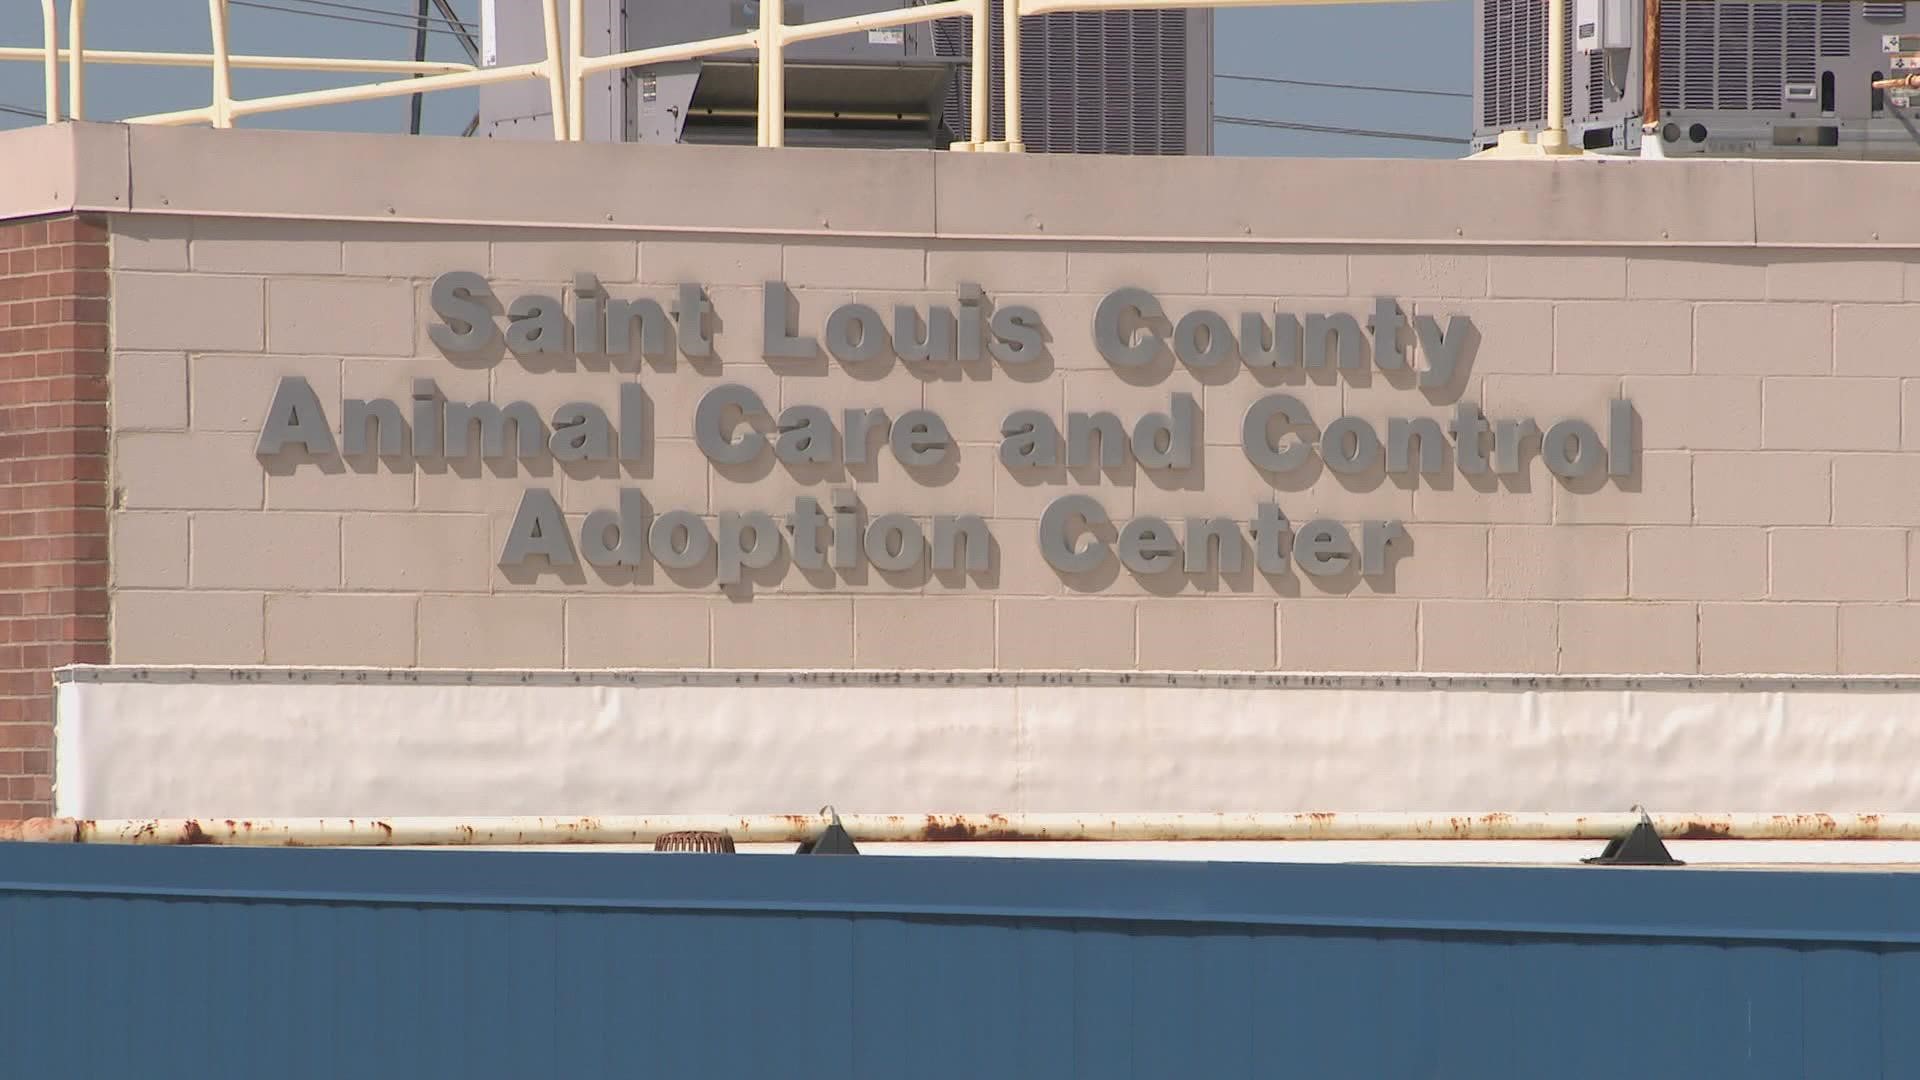 As an extra precaution, the facility has suspended adoptions and "meet and greet" sessions with potential adopters.